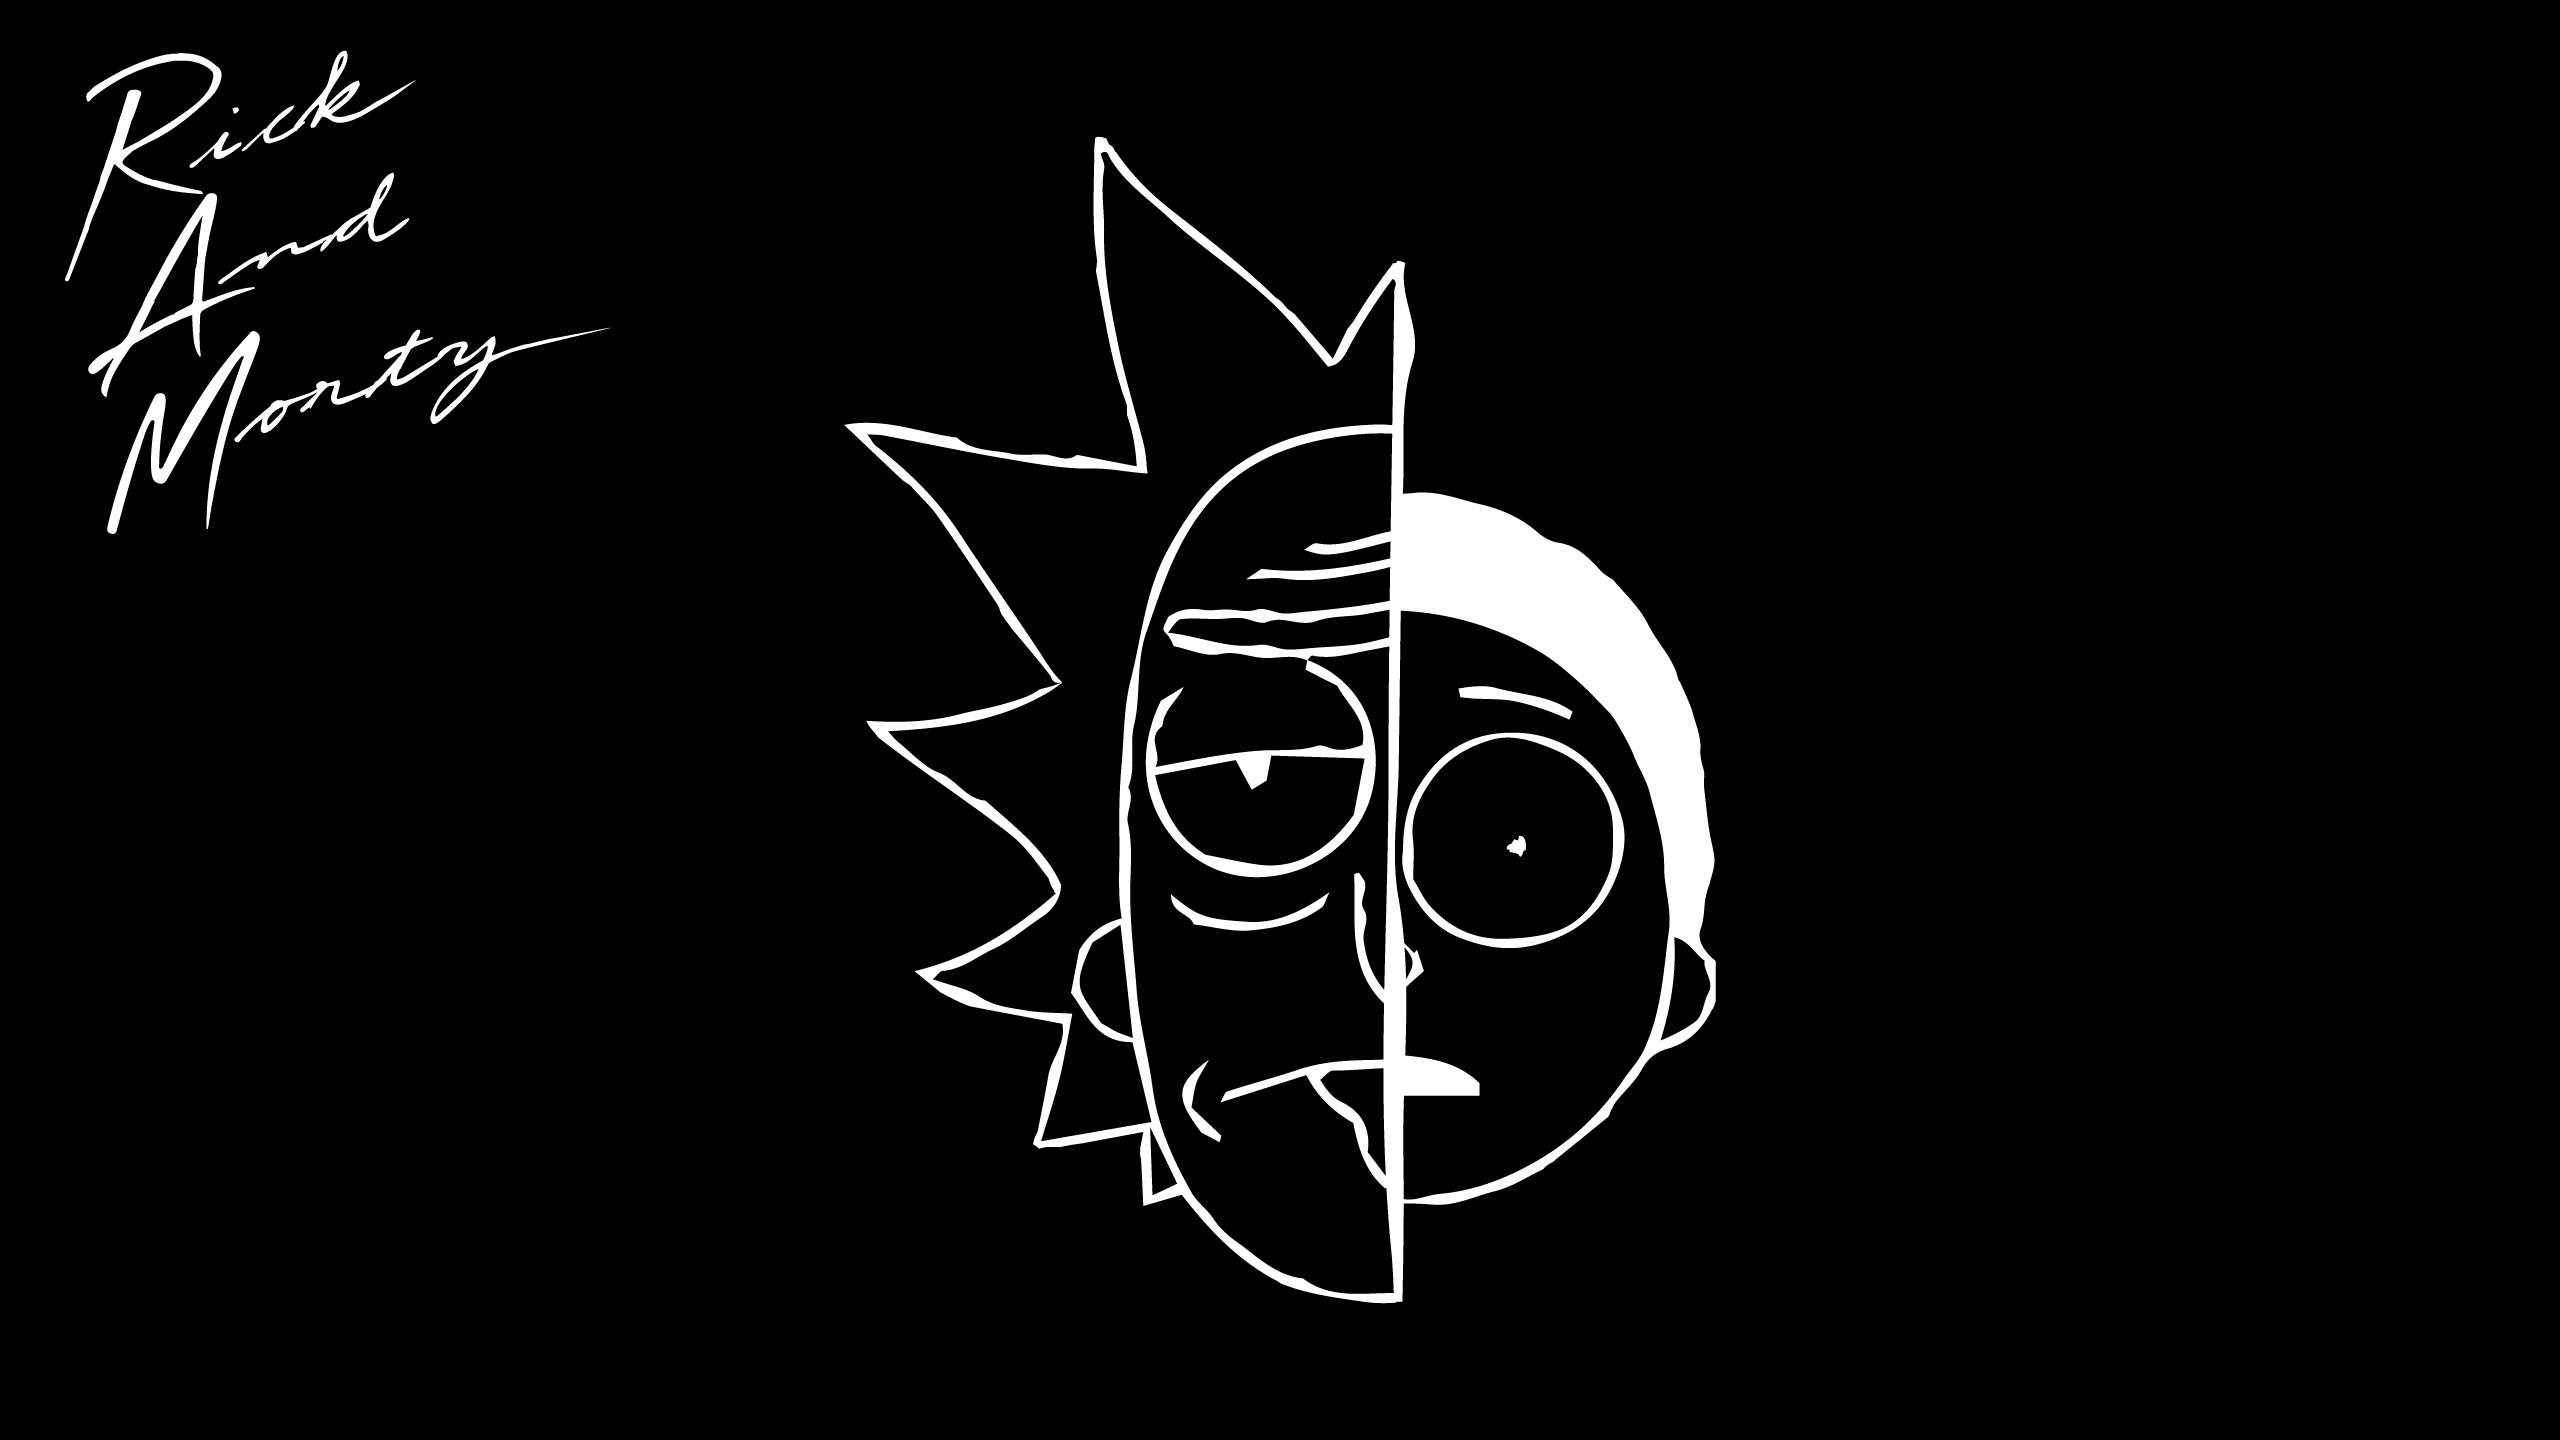 Wallpaper Rick And Morty Black Background 1920x1080 hd size 326kb view ...